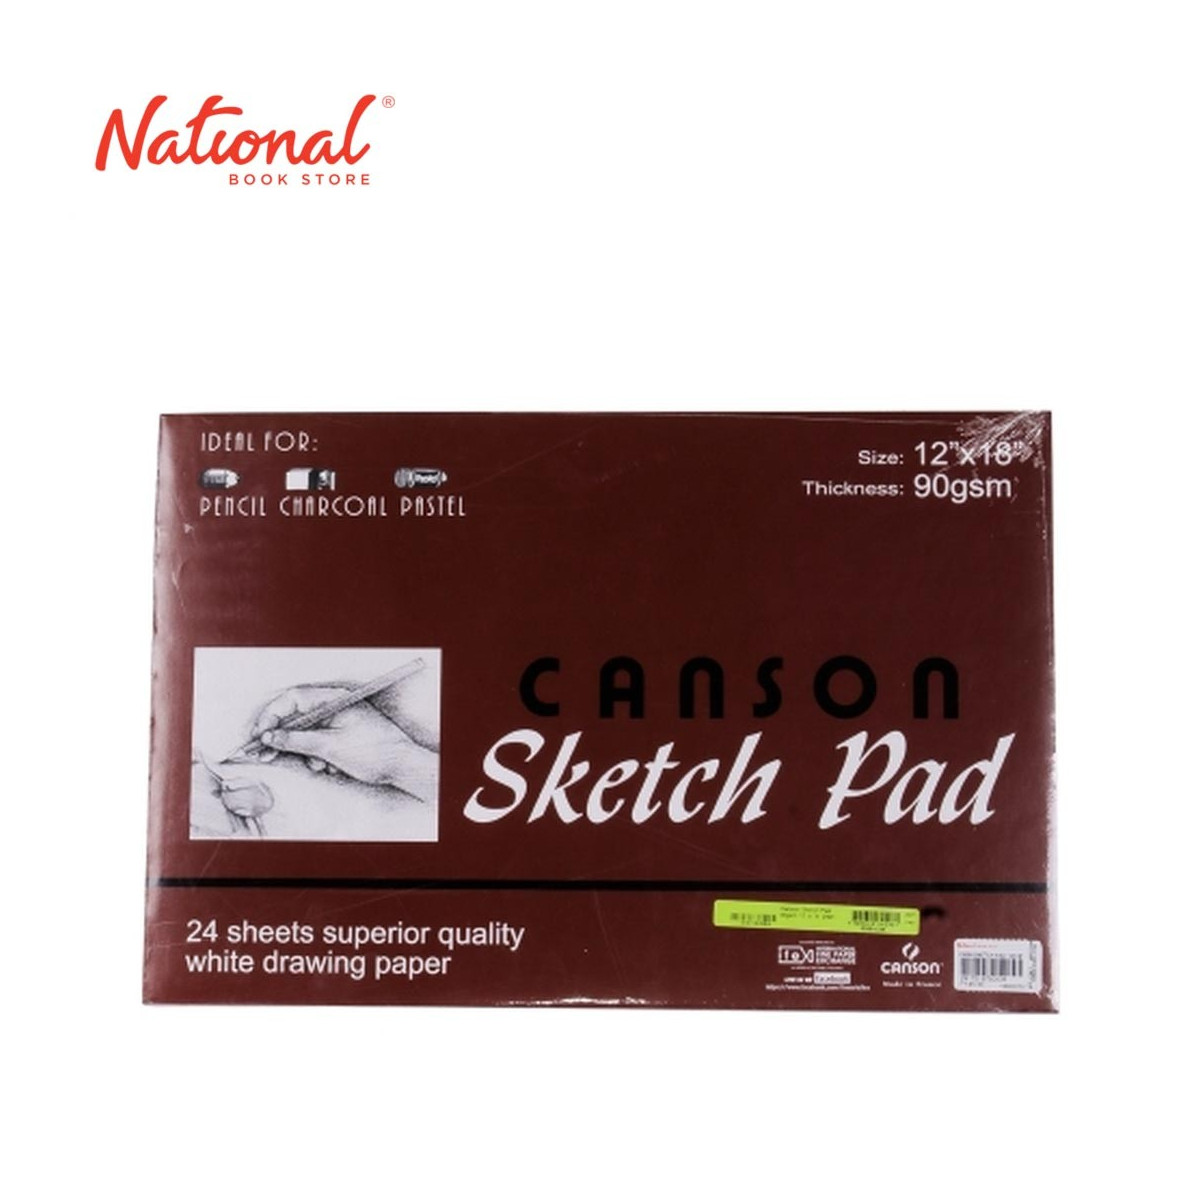 CANSON SKETCH PAD 12X18 24 SHEETS PADDED 90GSM